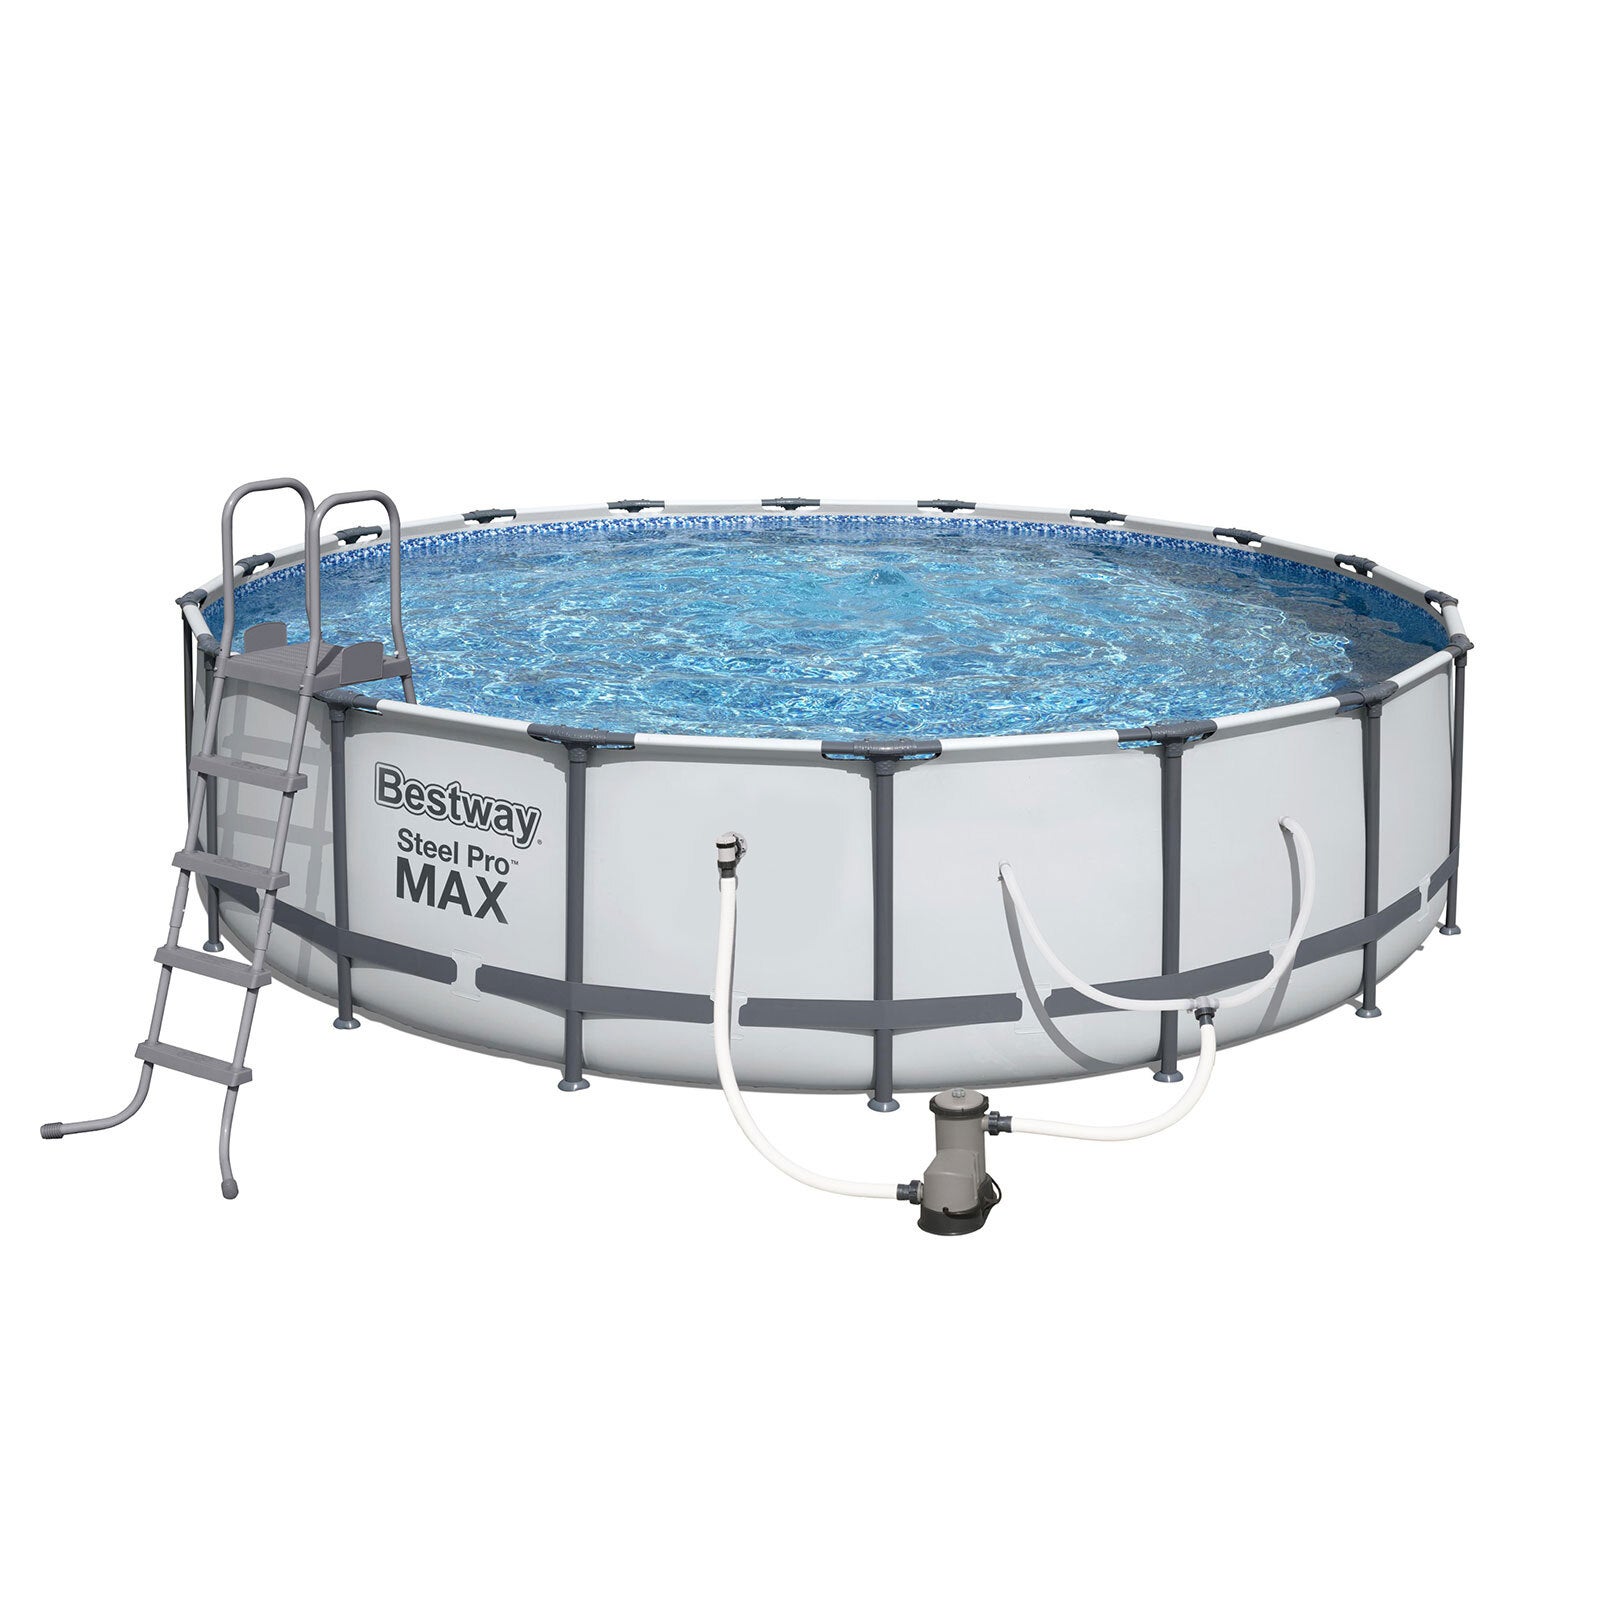 Bestway Steel Pro Frame Above Ground Swimming Pool 18ft 56459 547cm